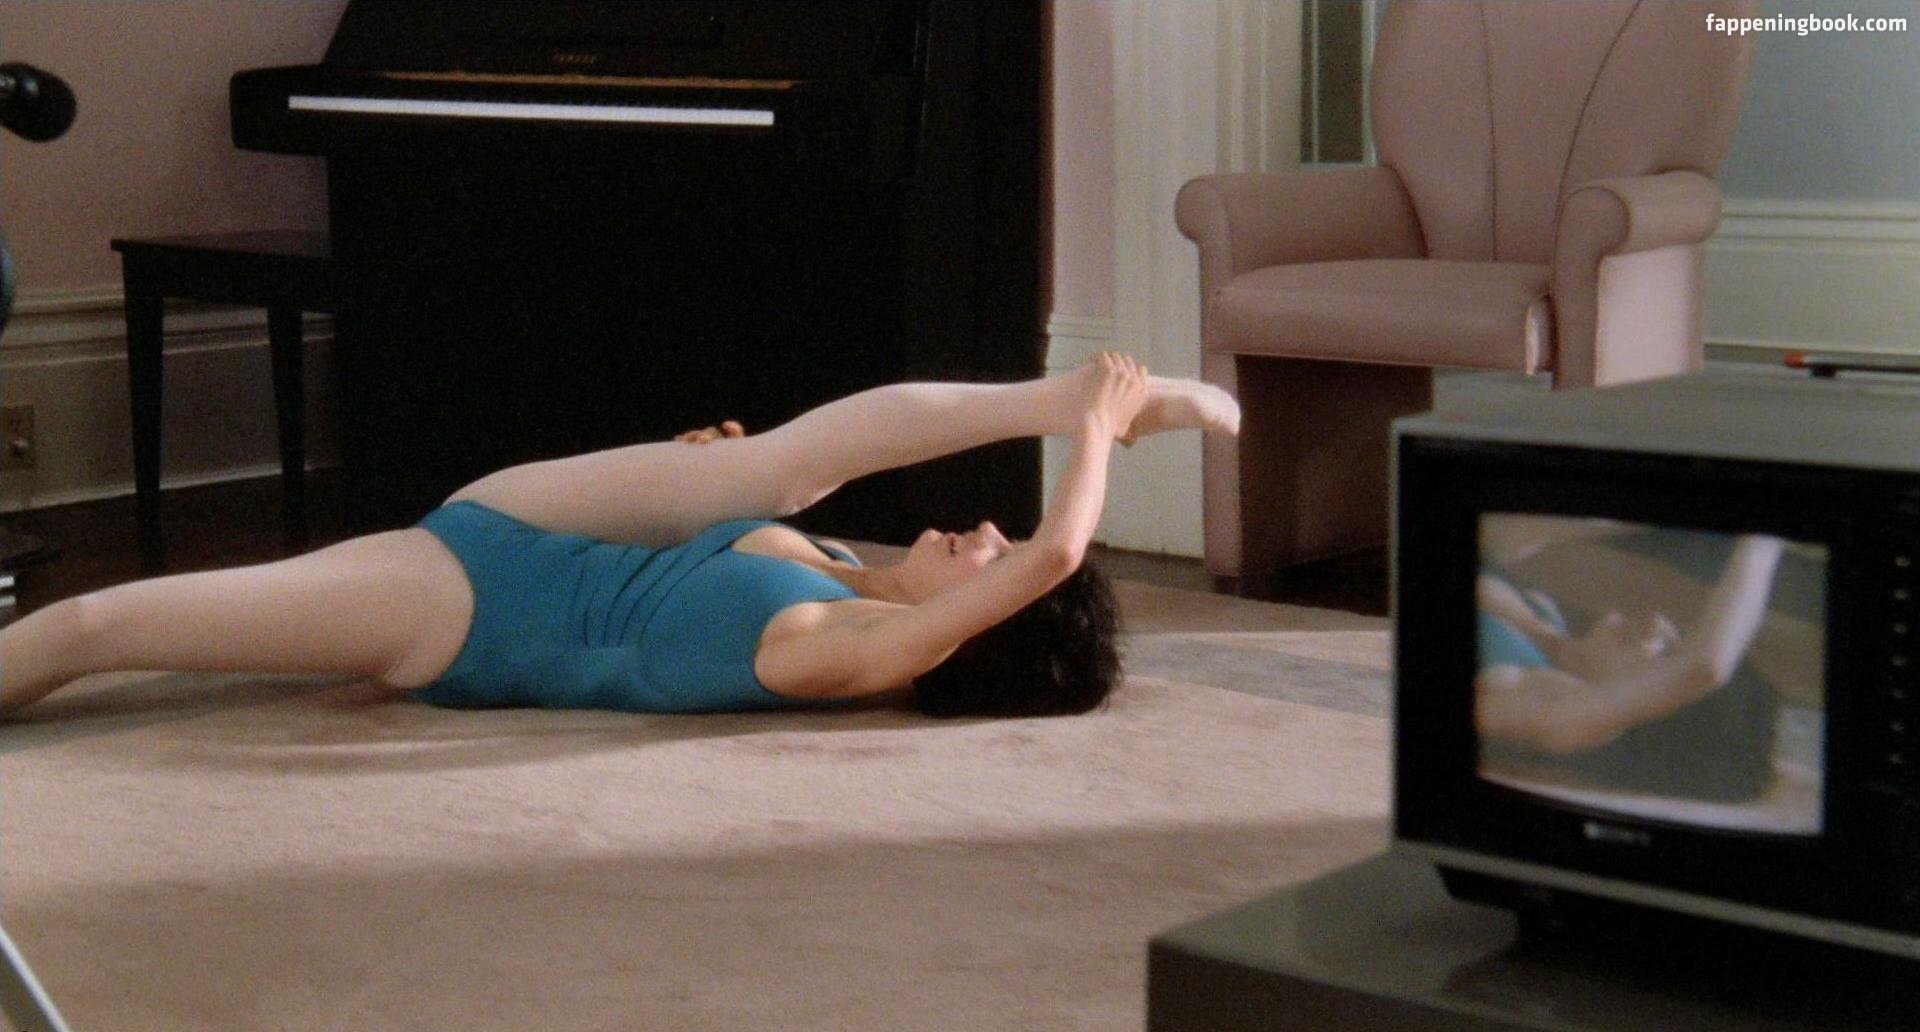 Meg Tilly Nude, The Fappening - Photo #377074 - FappeningBook.